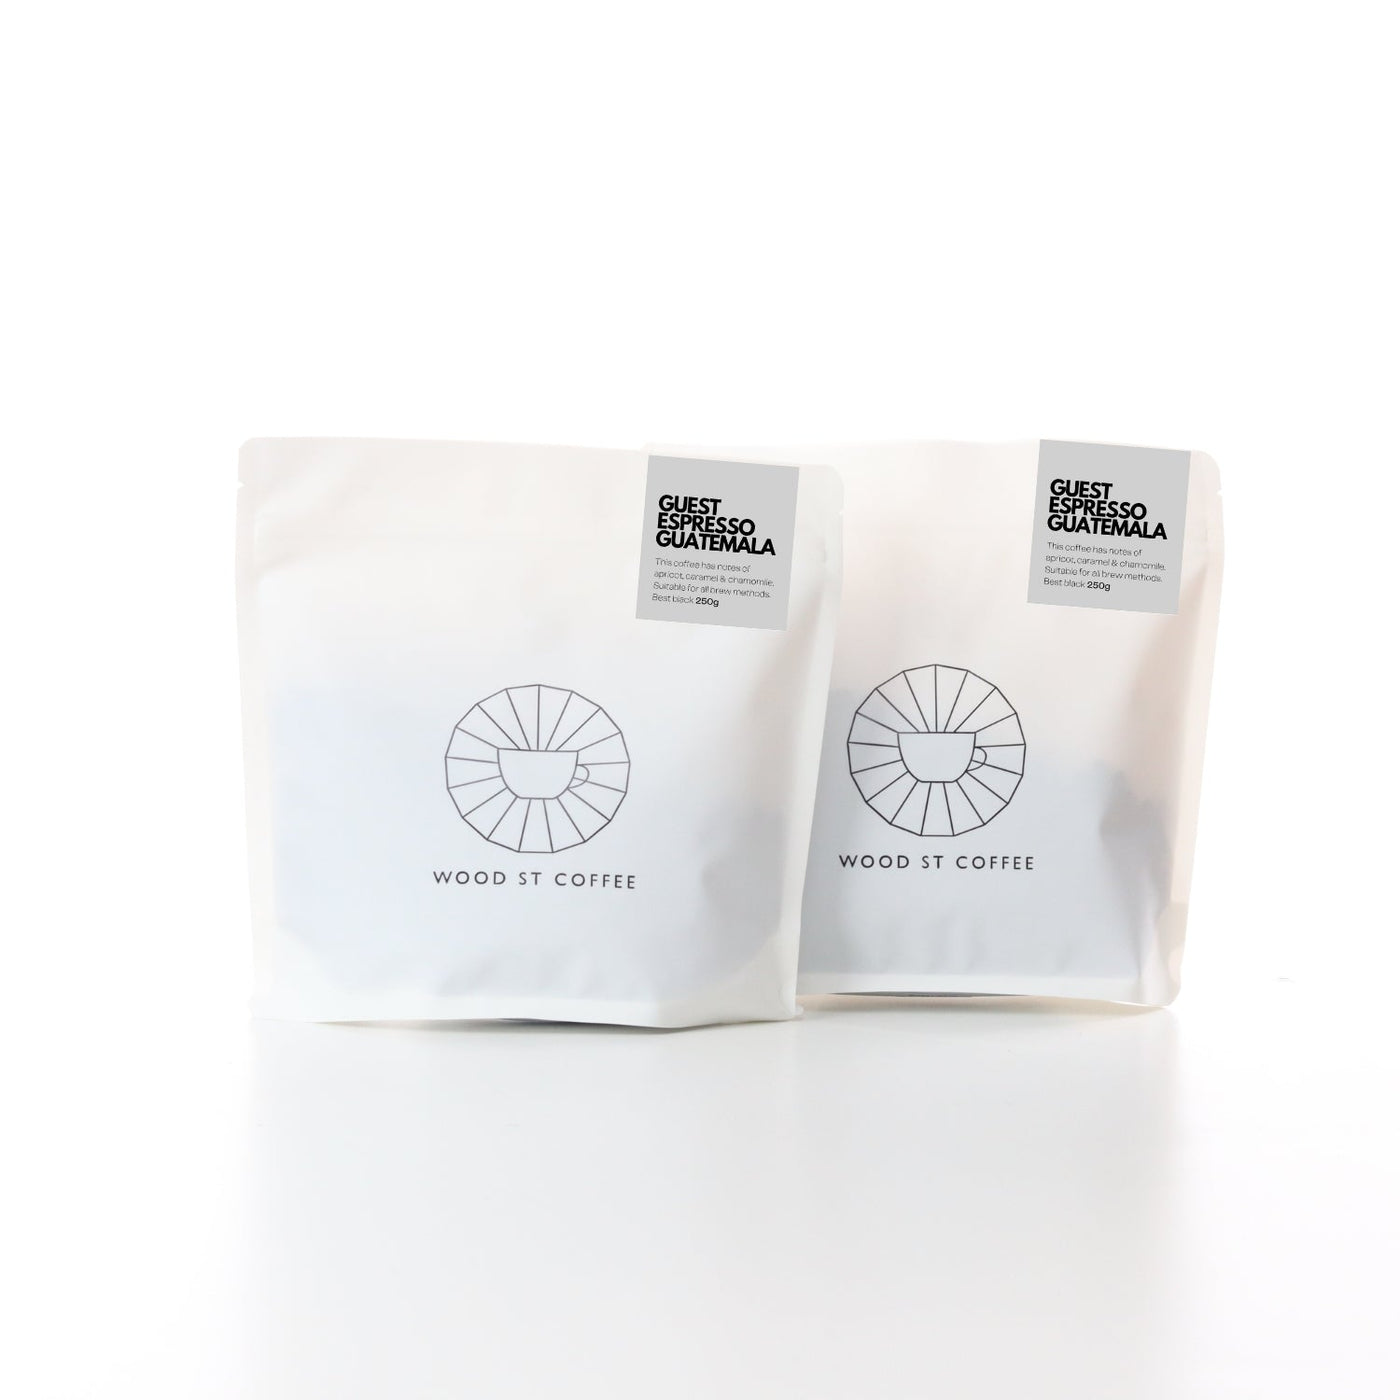 3 Months Guest Espresso Gift Subscription (delivery every 4 weeks)